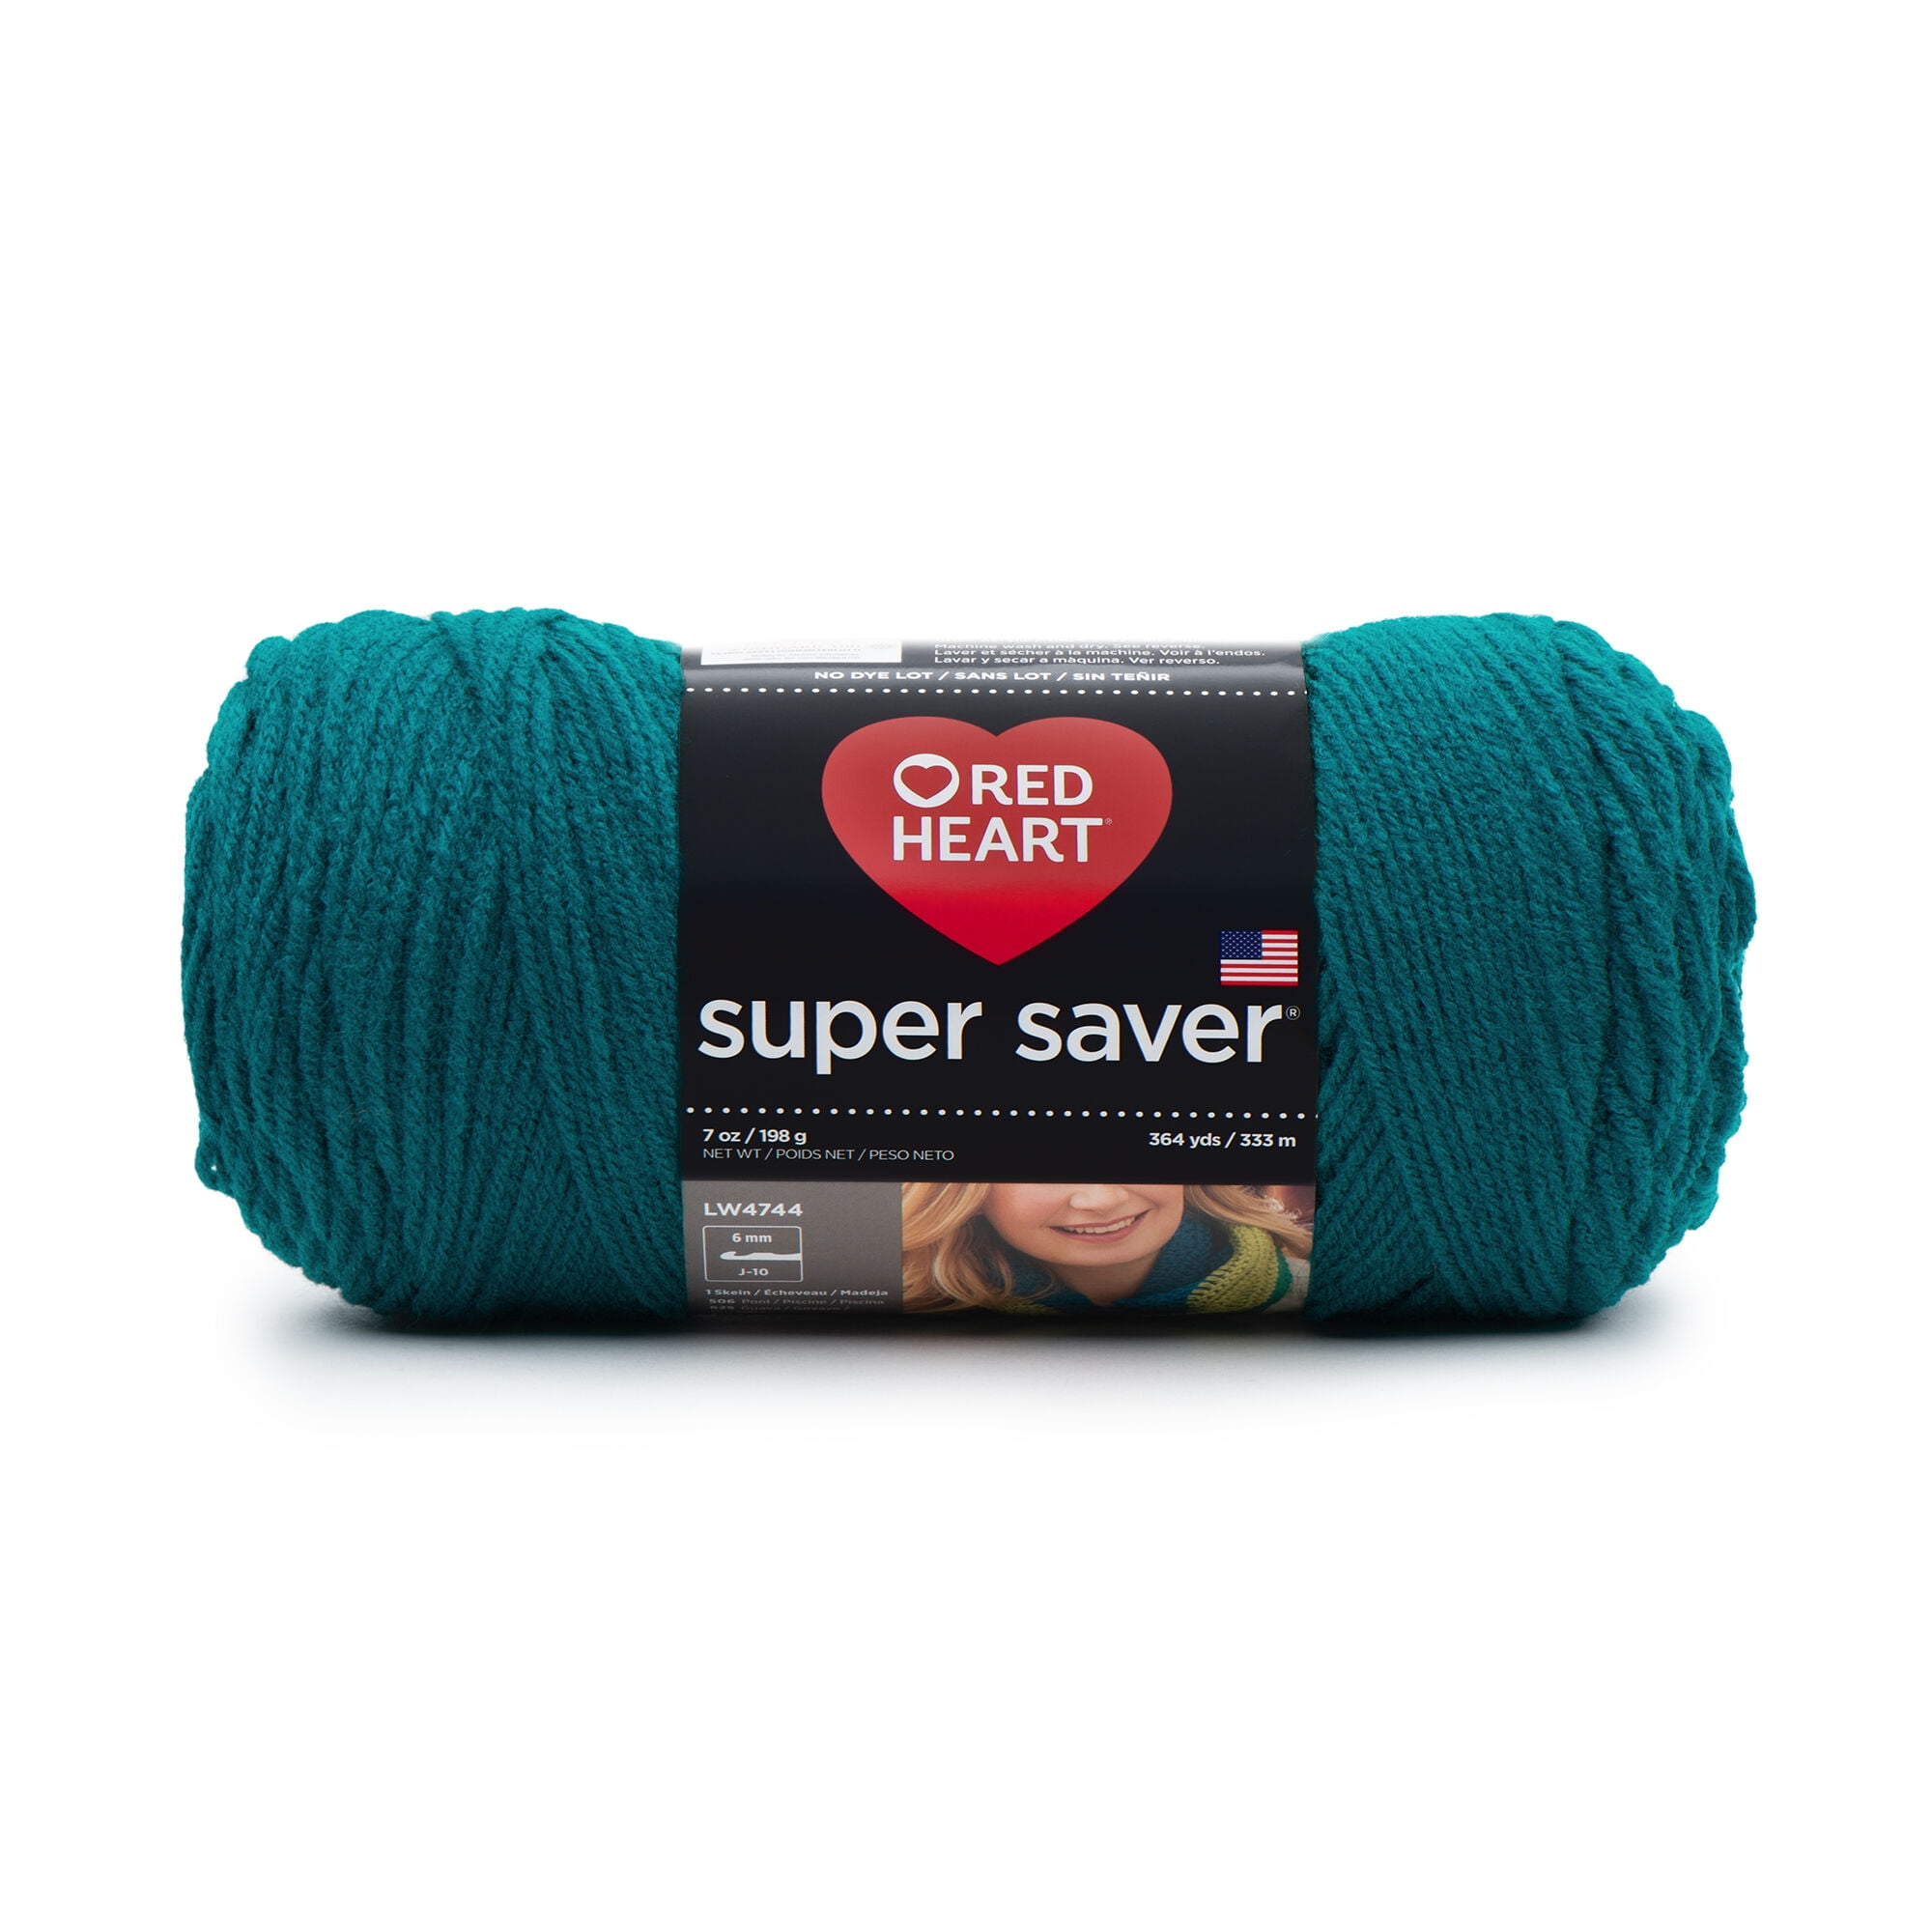 Red Heart Soft Yarn-Teal, 1 count - Kroger